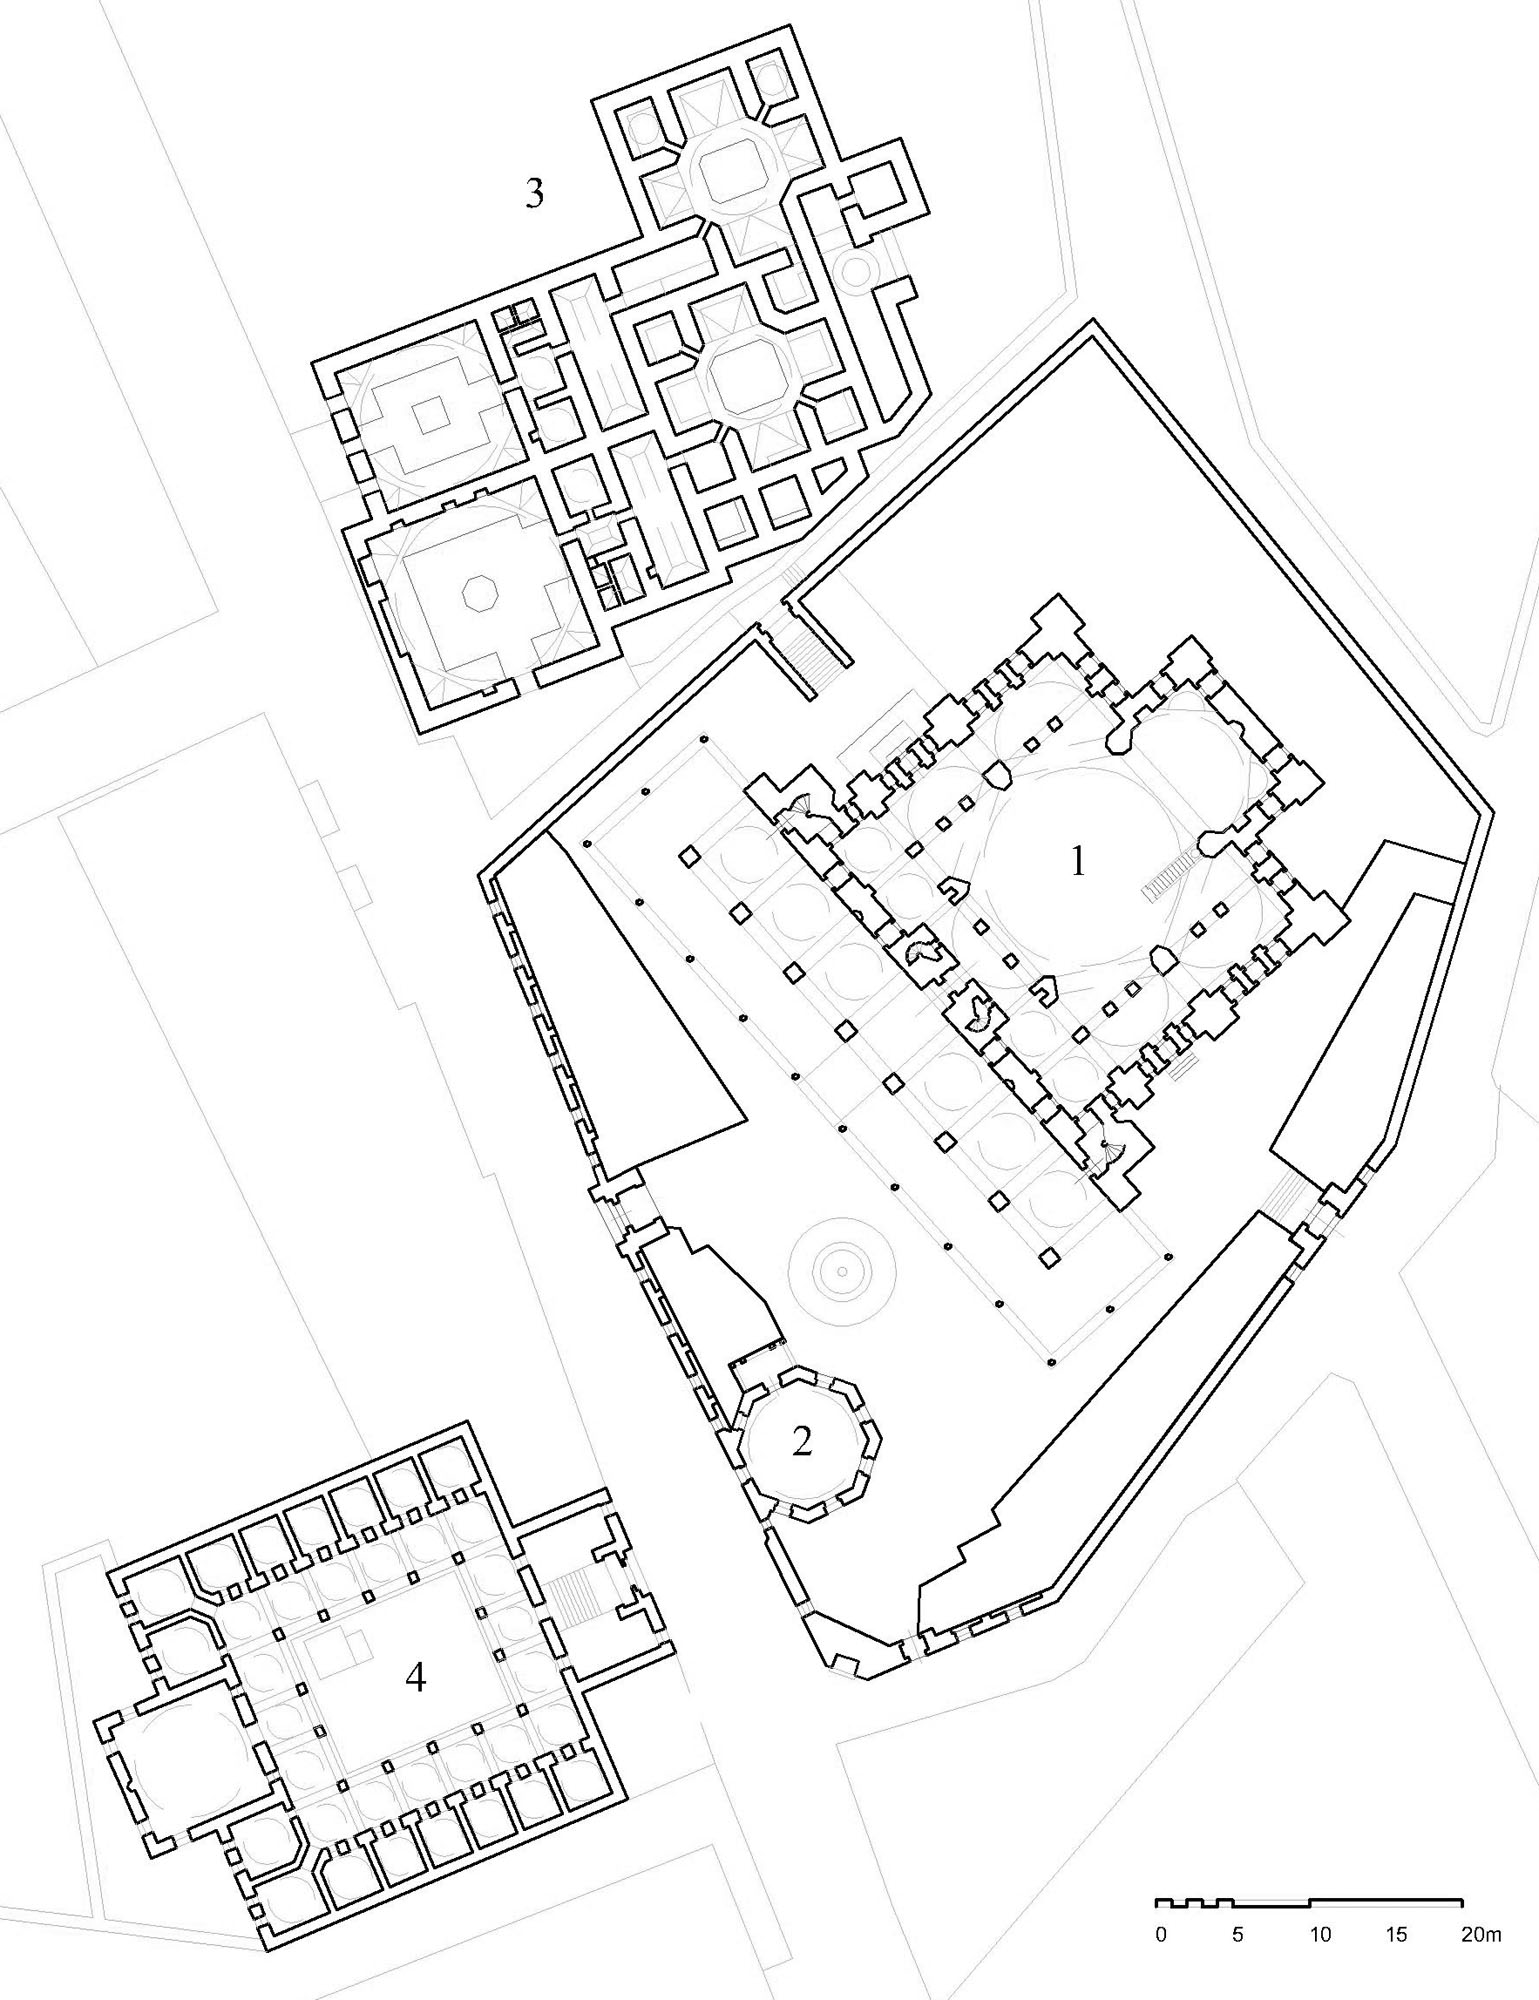 Cerrah Mehmed Paşa Külliyesi - Floor plan of complex showing (1) mosque, (2) mausoleum, (3) double baths, (4) madrasa of Gevherhan Sultan. DWG file in AutoCAD 2000 format. Click the download button to download a zipped file containing the .dwg file.